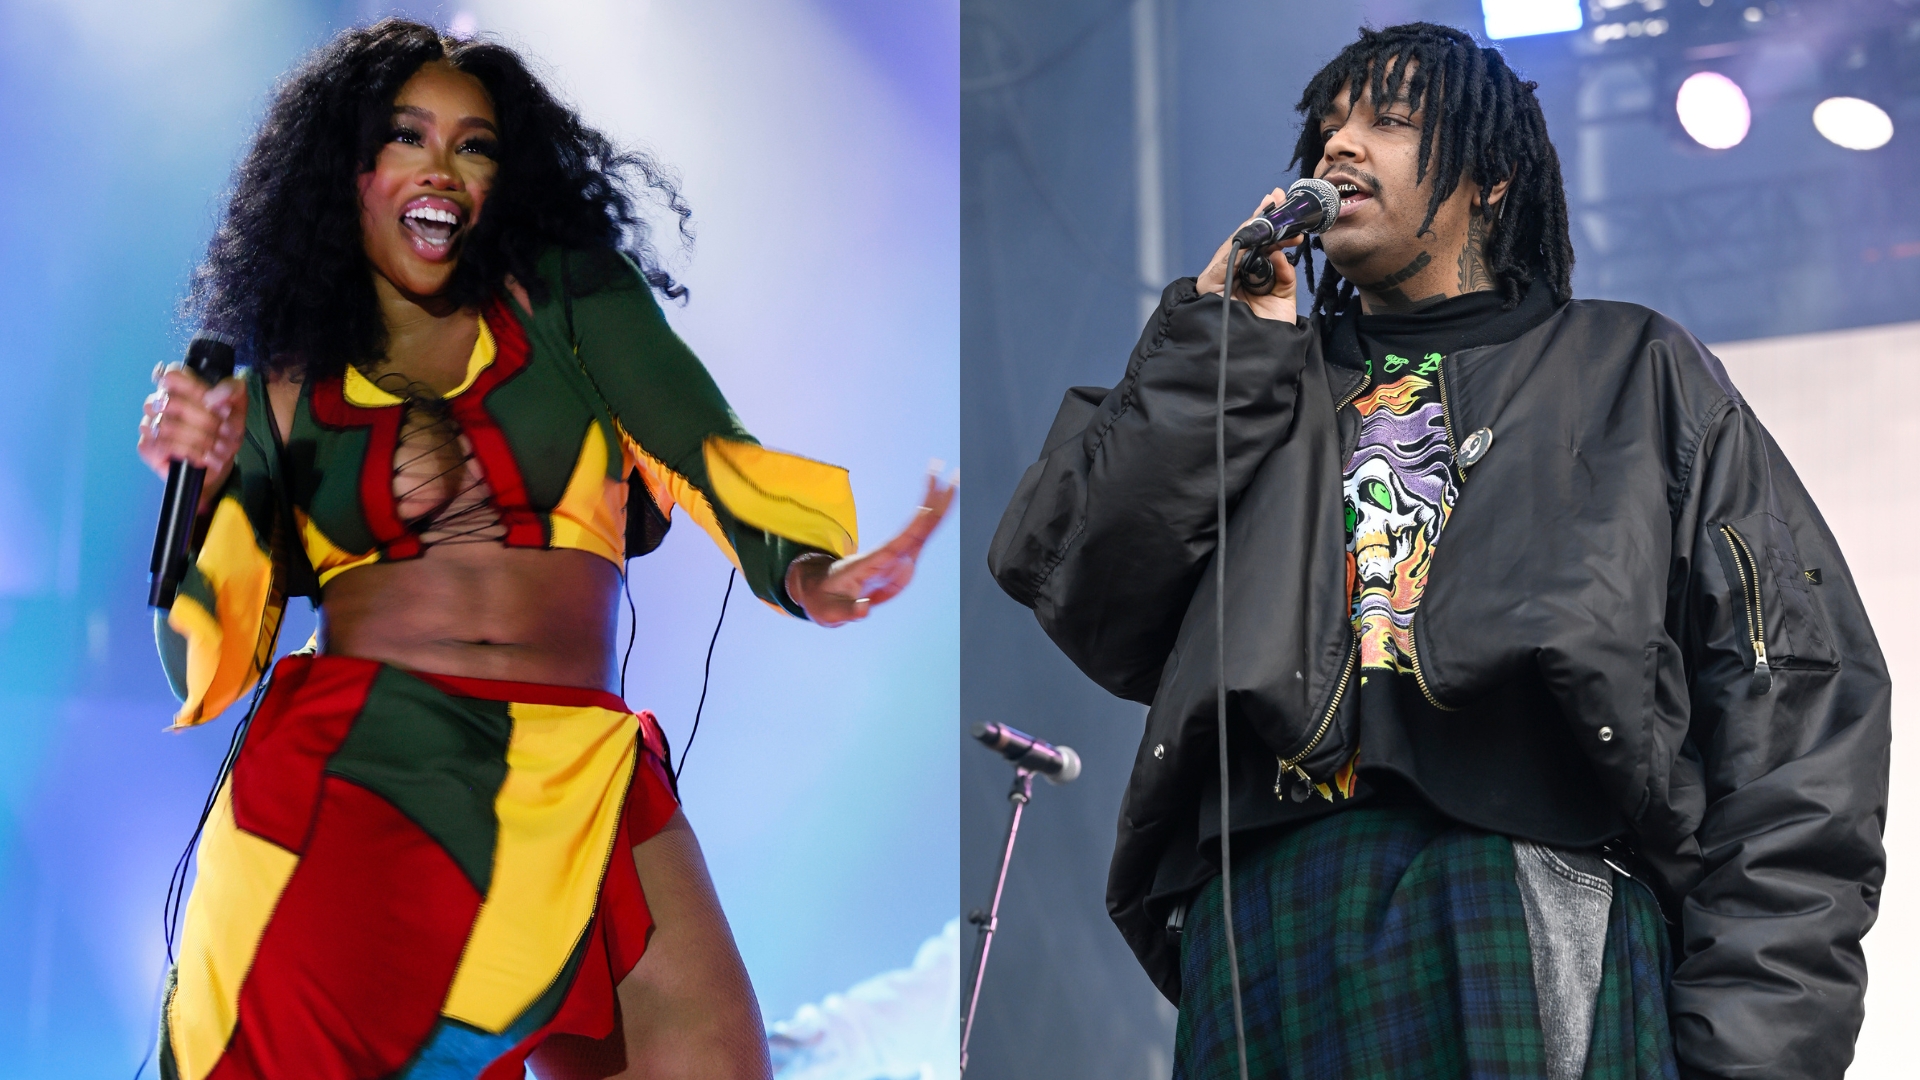 SZA & Jean Dawson’s “NO SZNS” Fits Right Into Our “R&B Season” Playlist Update